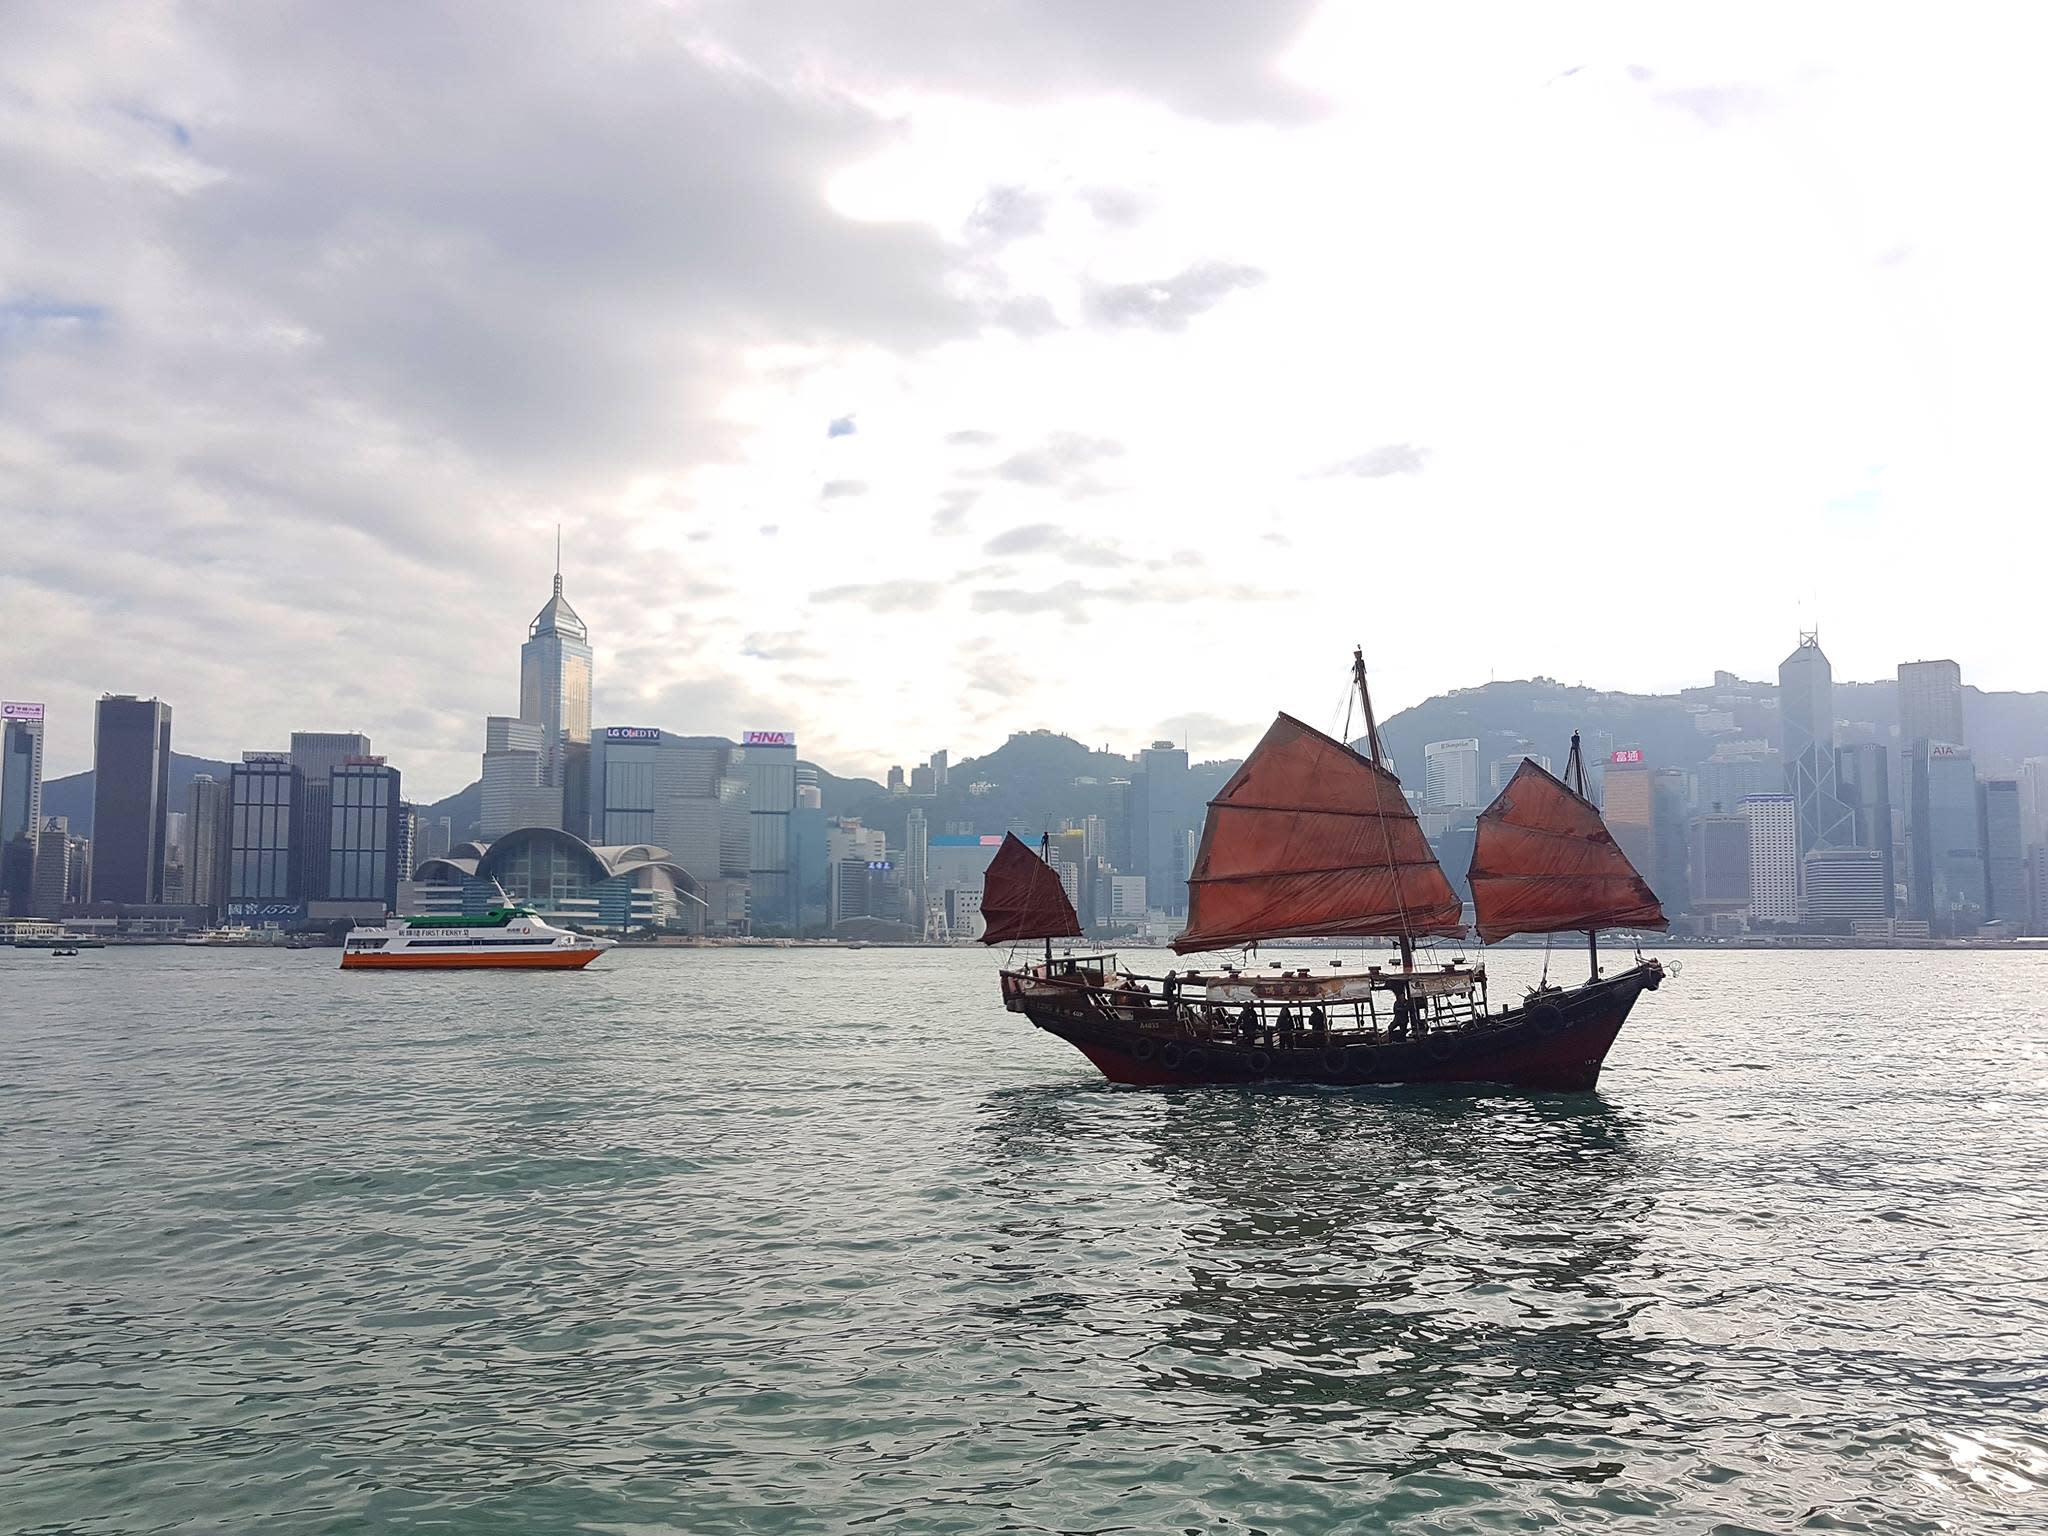 Photo of an old sailboat on the water with the Hong Kong skyline in the background